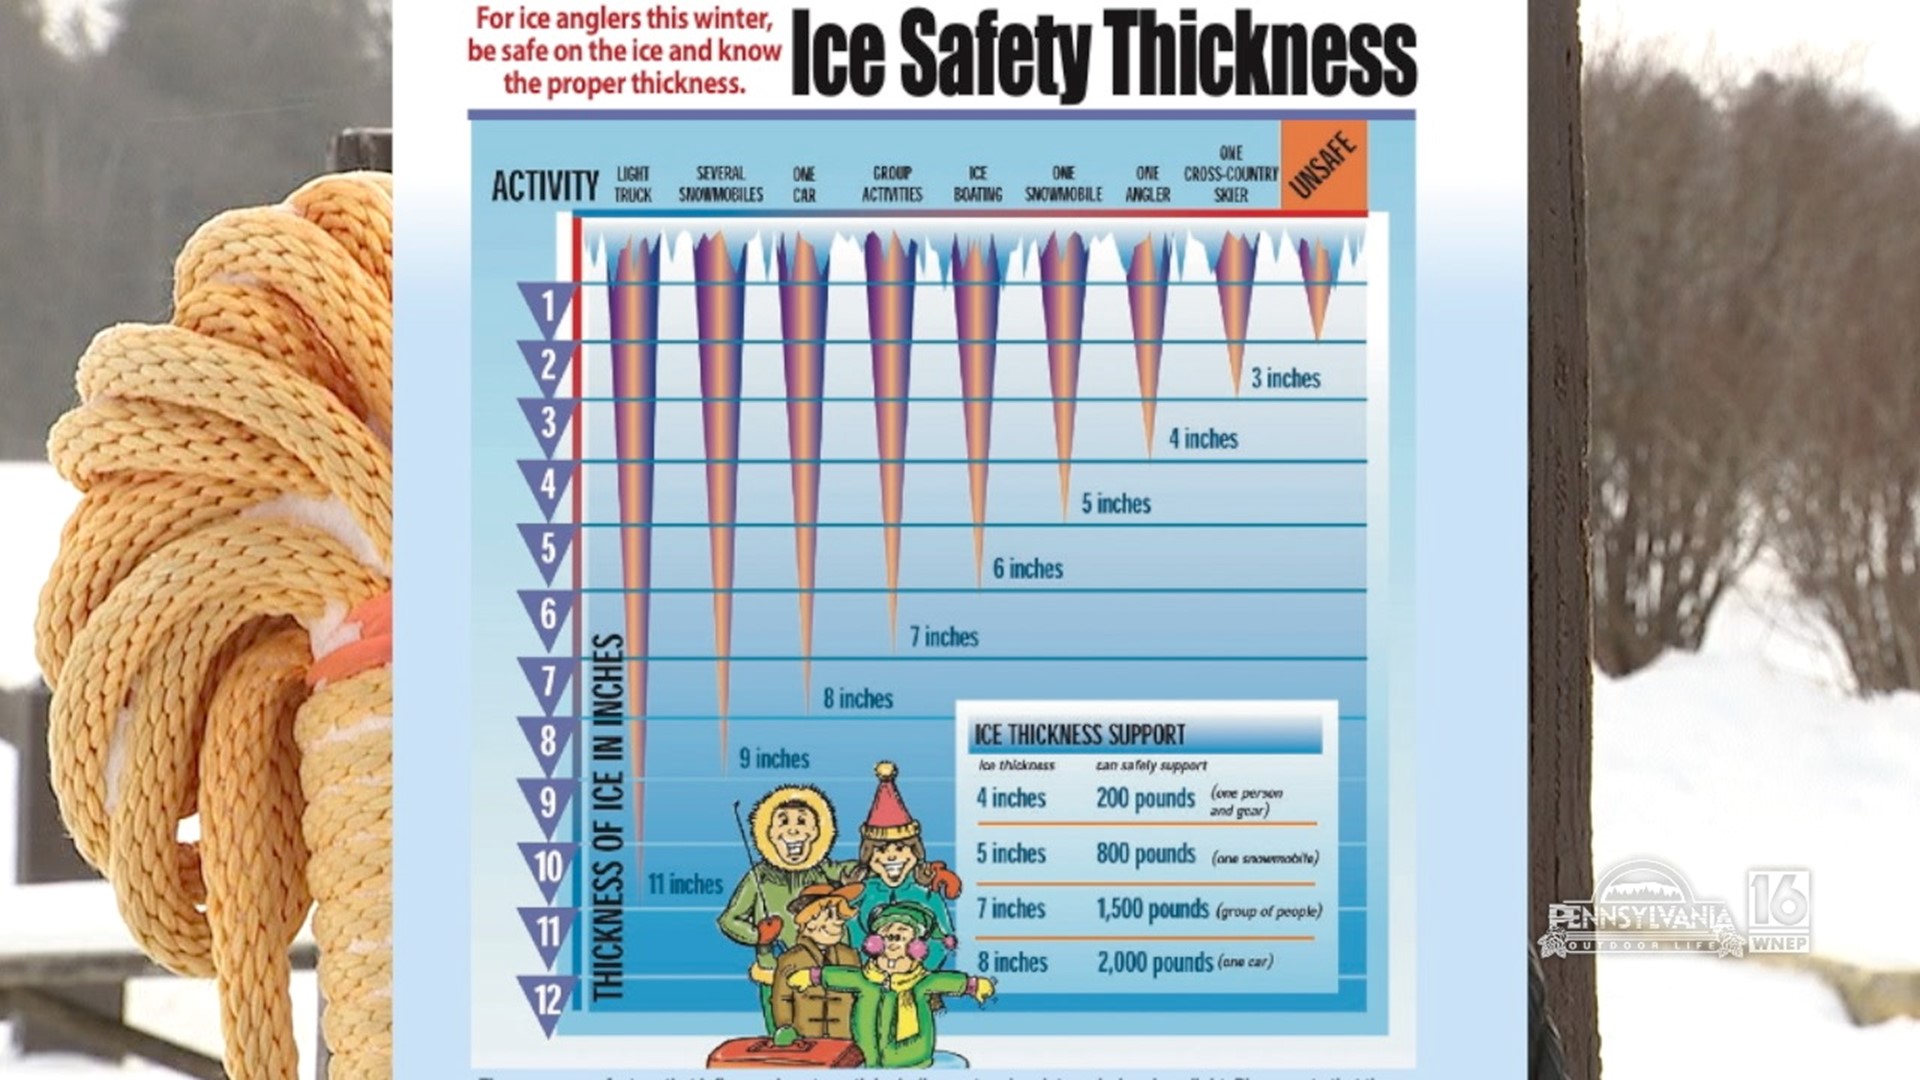 Steps you can take to stay safe on the ice this winter.